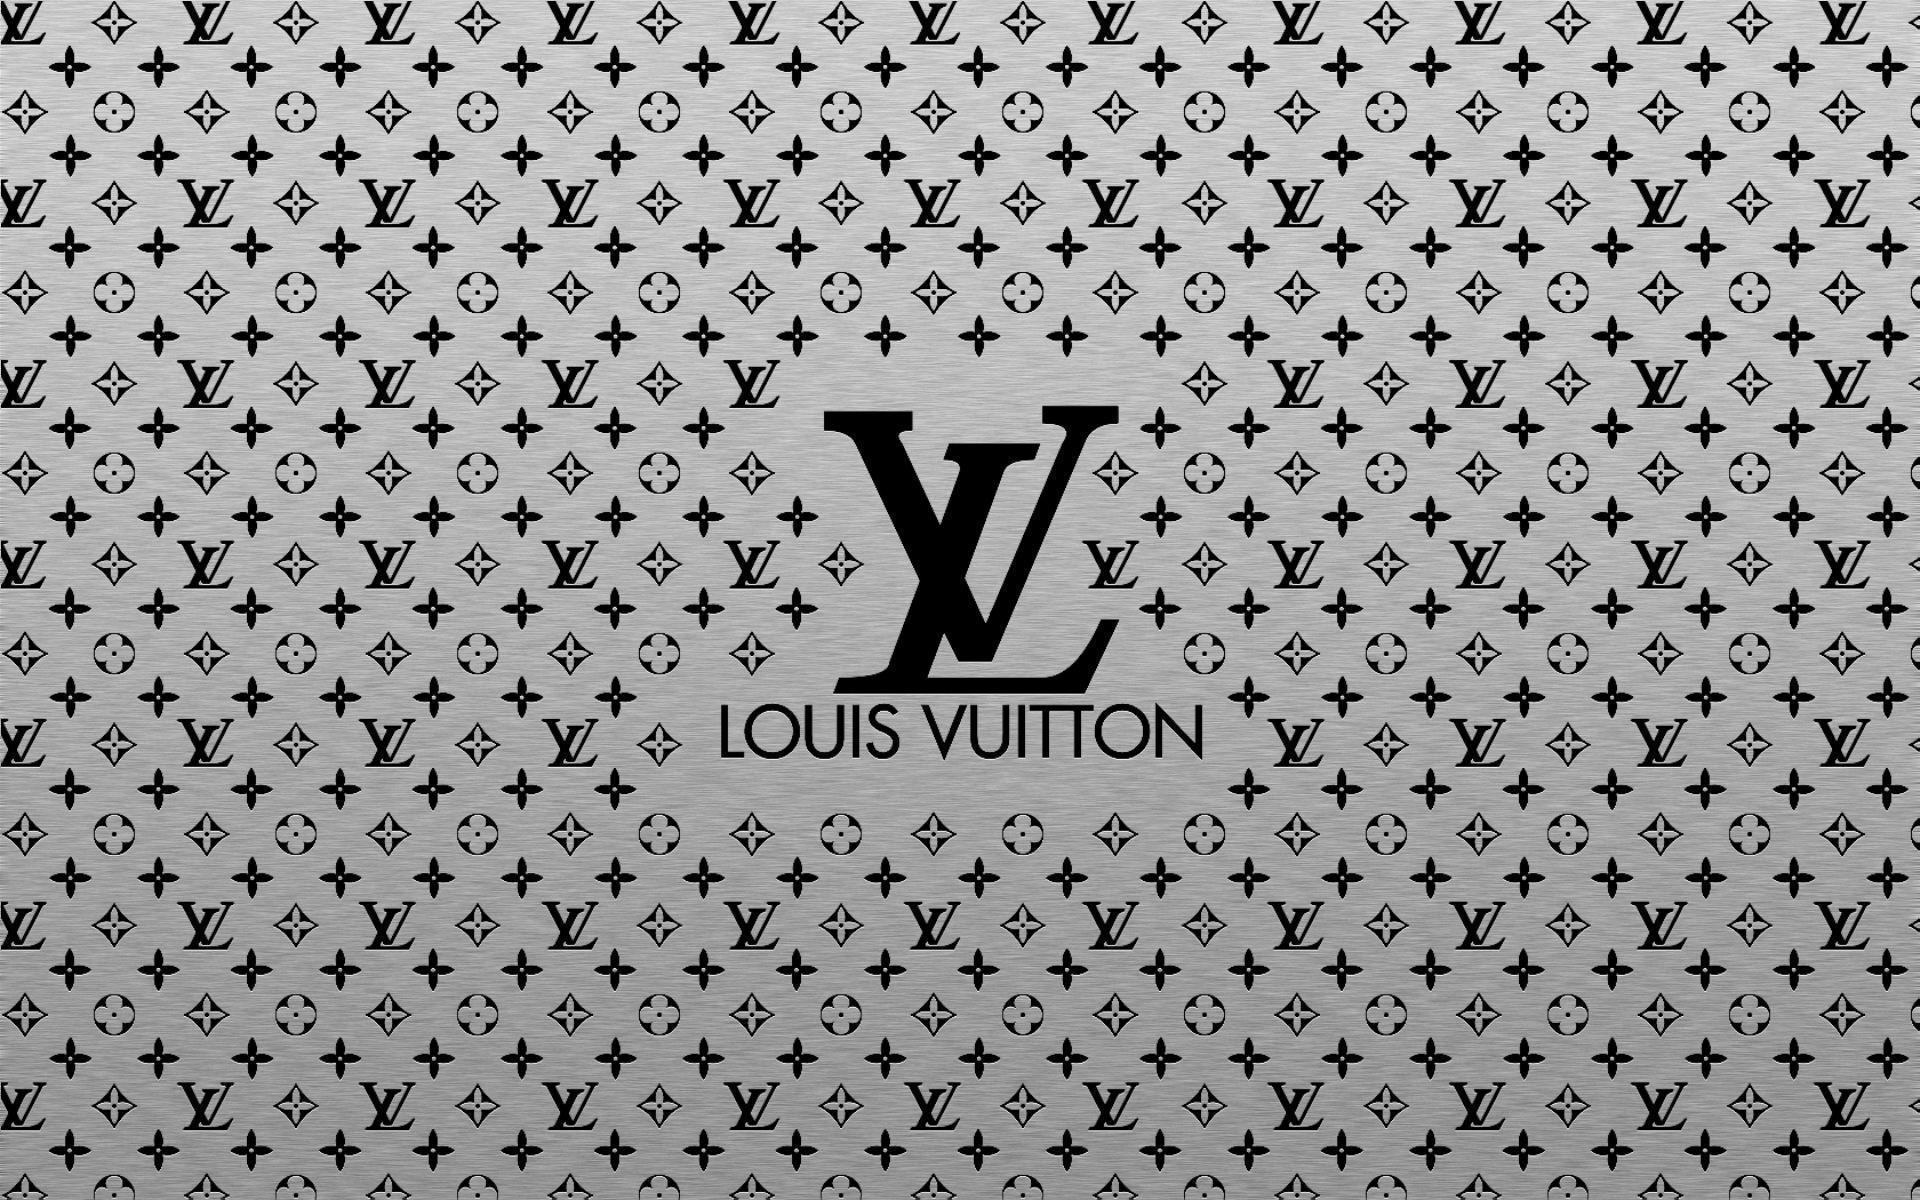 Louis Vuitton Wallpapers Download - KoLPaPer - Awesome Free HD Wallpapers